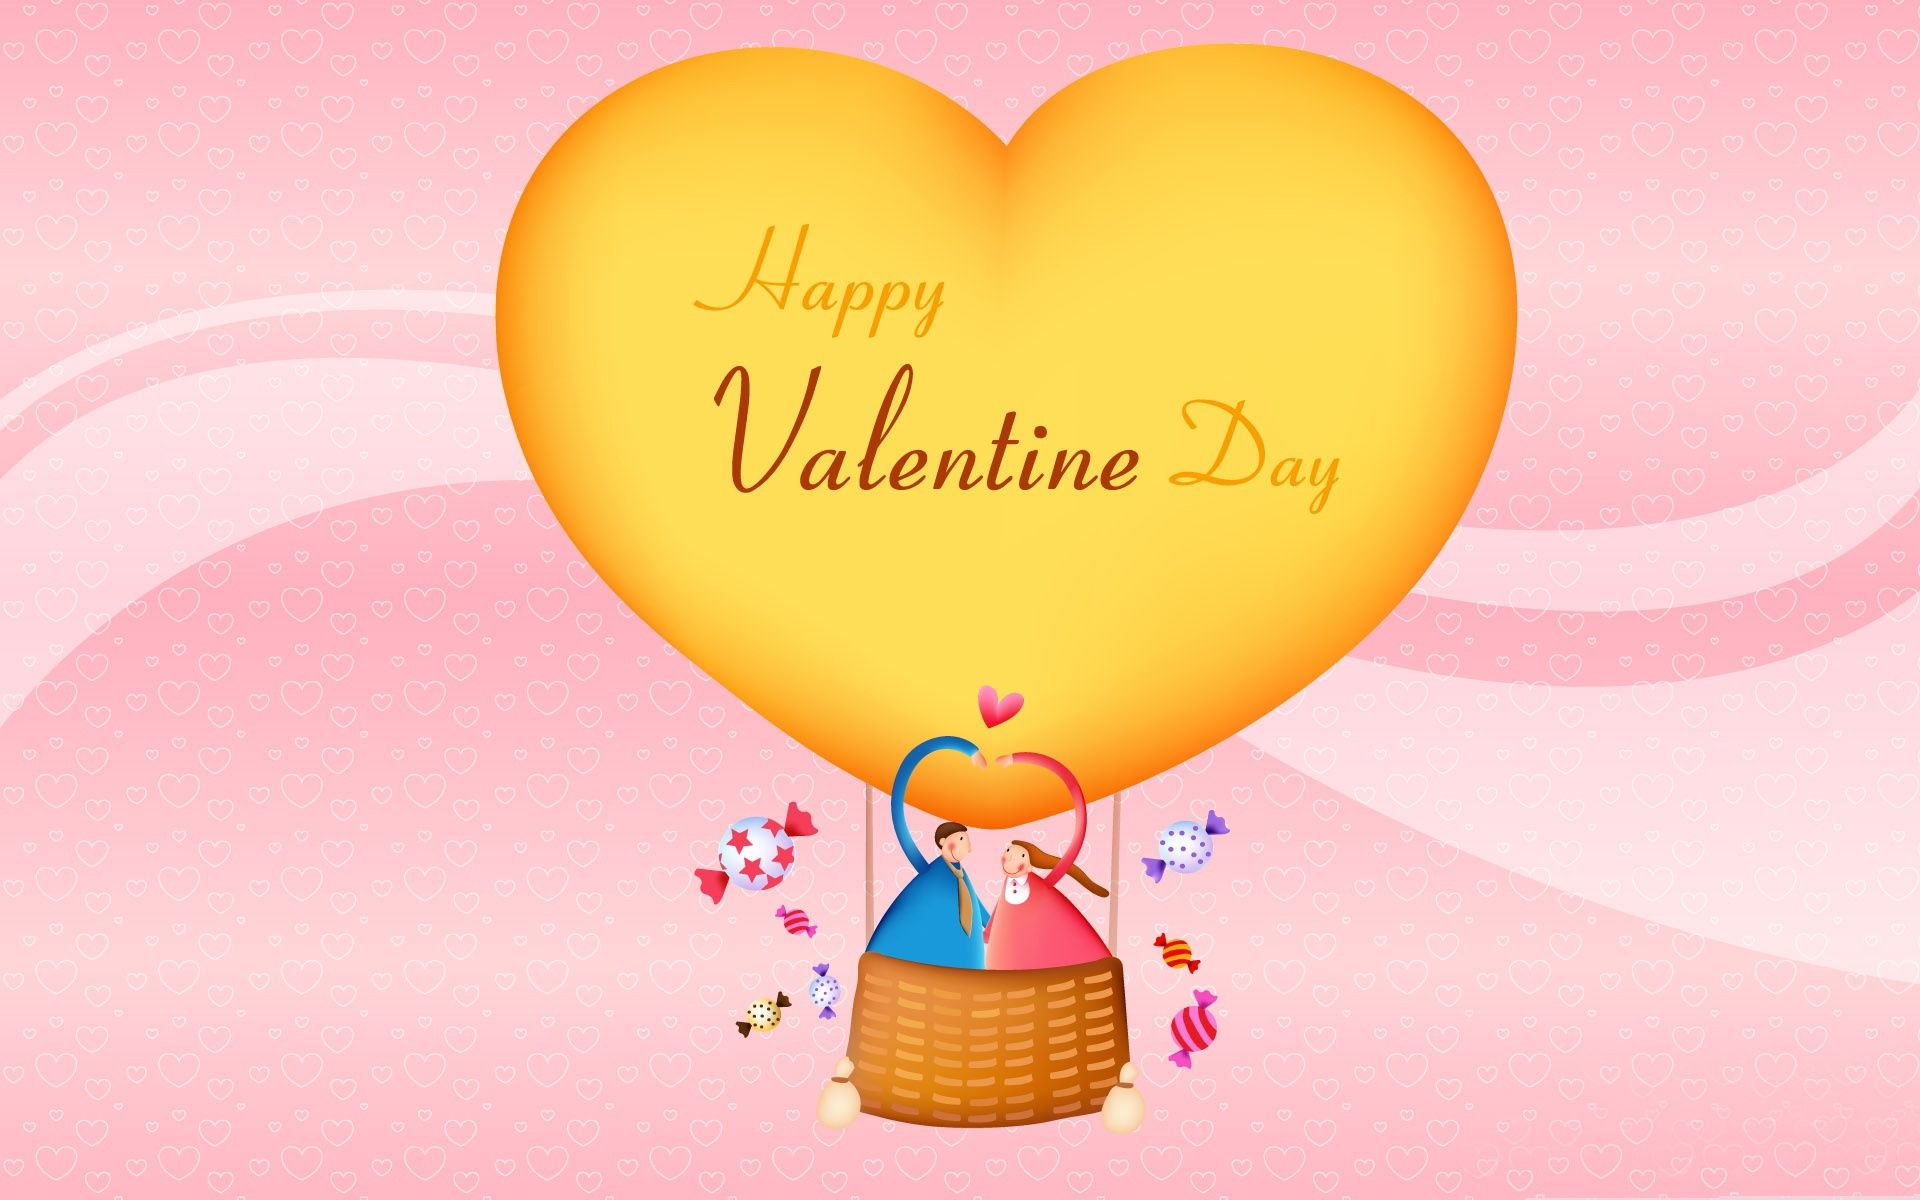 Happy Valentine's Day Wallpaper in jpg format for free download